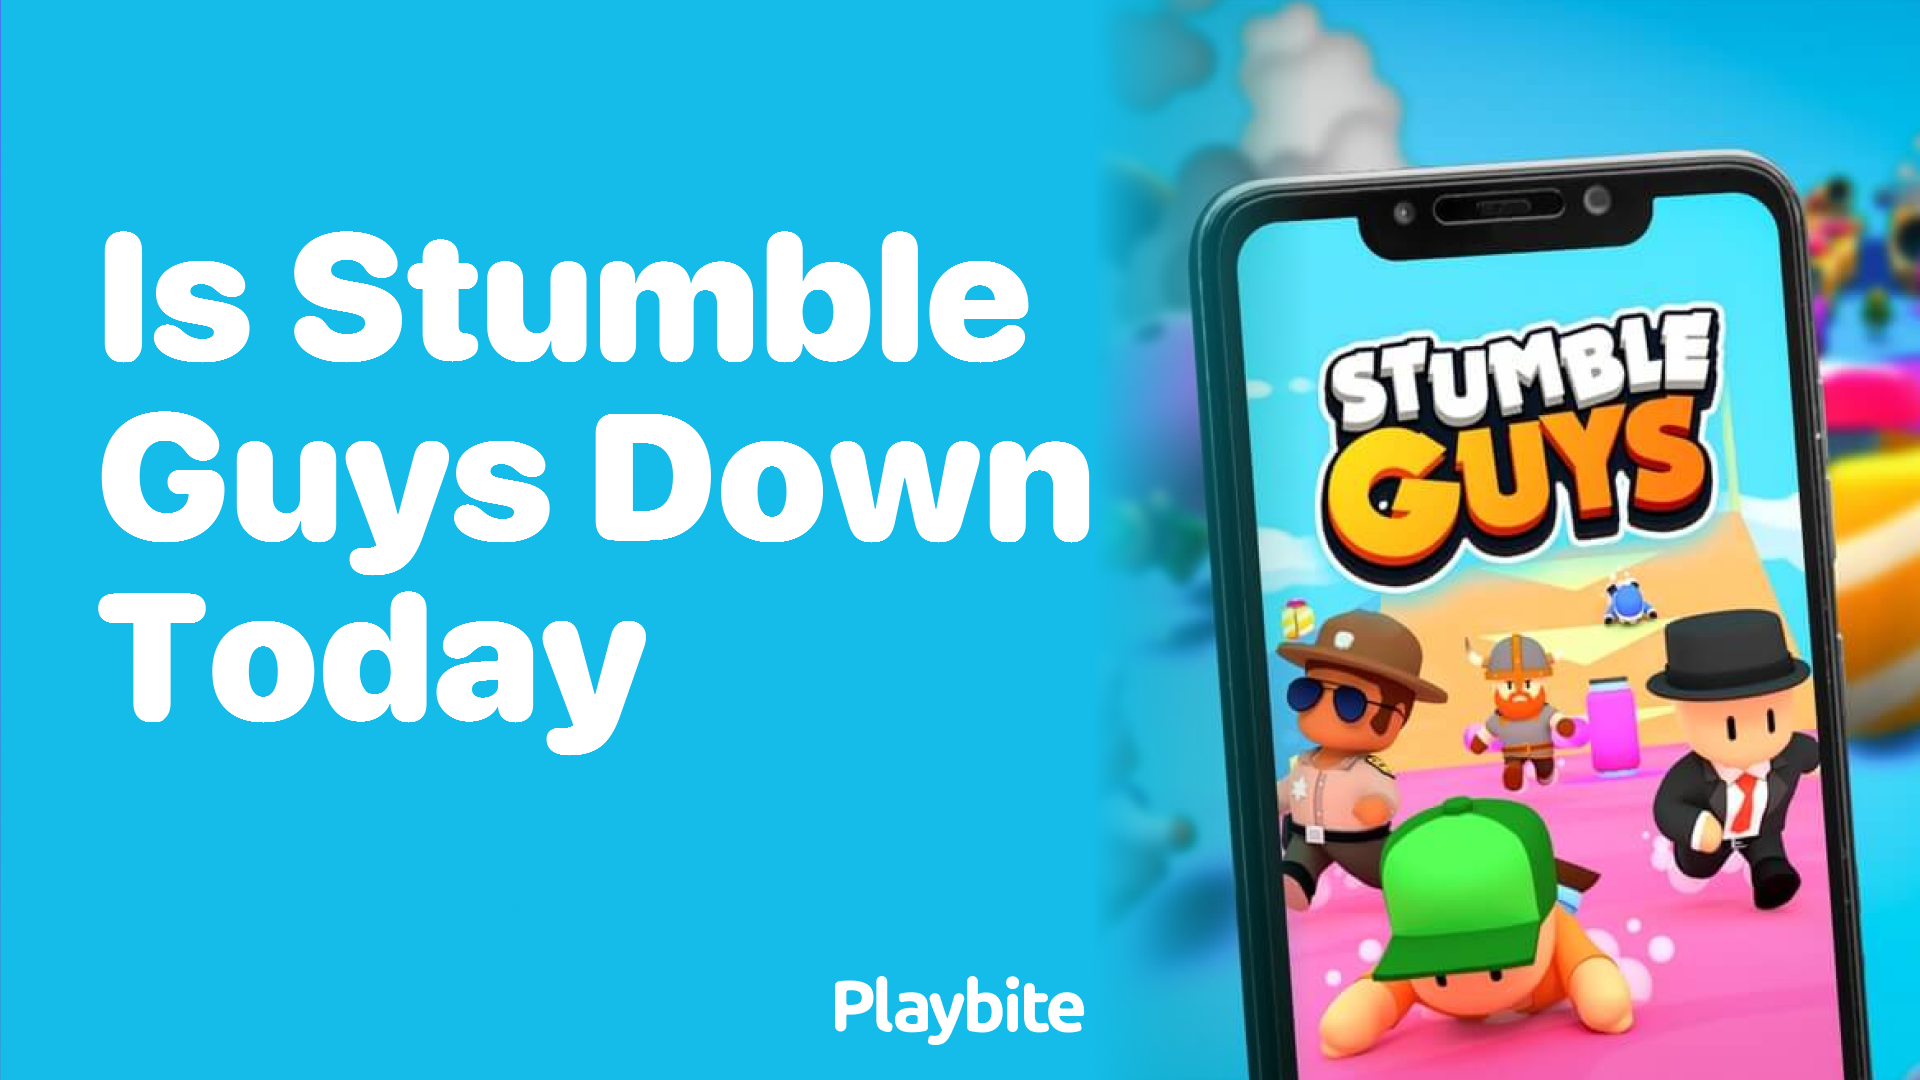 Is Stumble Guys Down Today? Find Out Now!